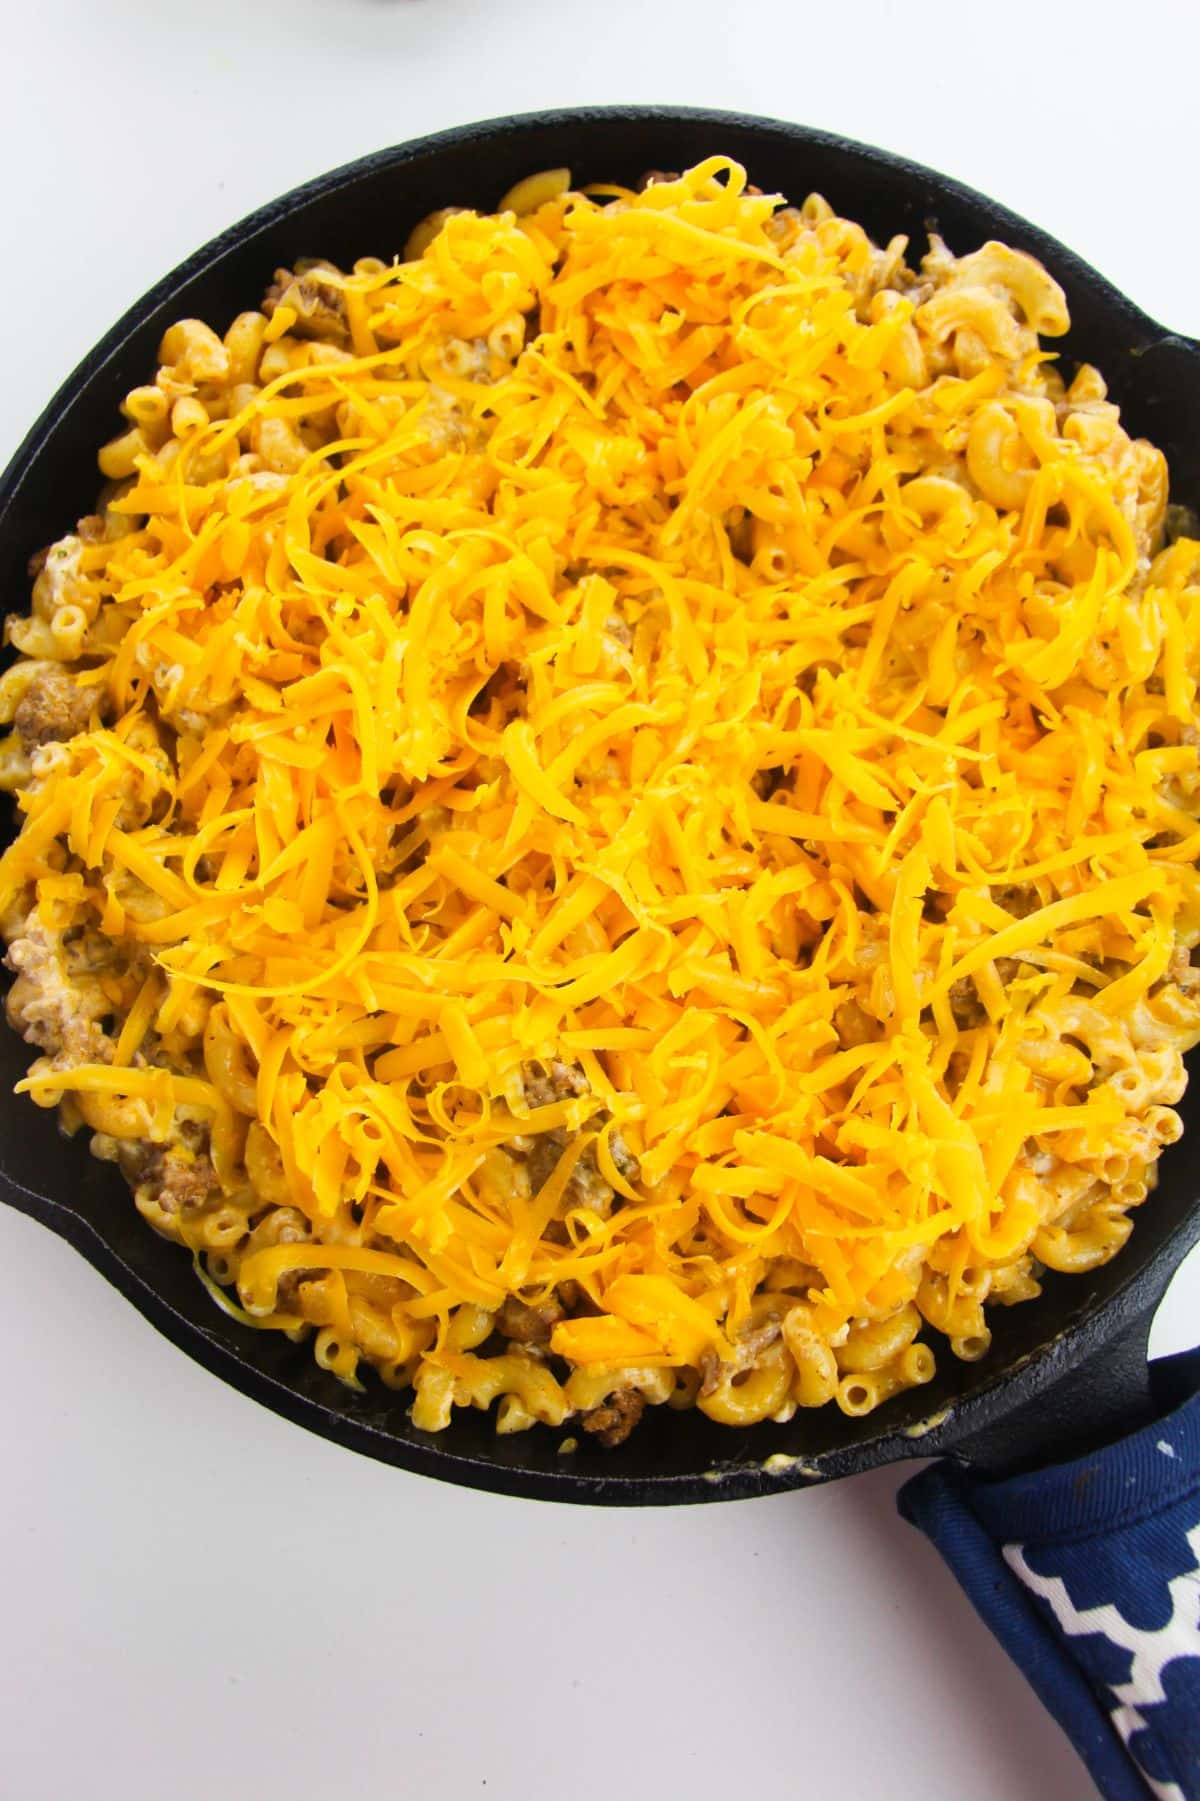 Shredded cheddar cheese is added to the pasta mixture in a large skillet.